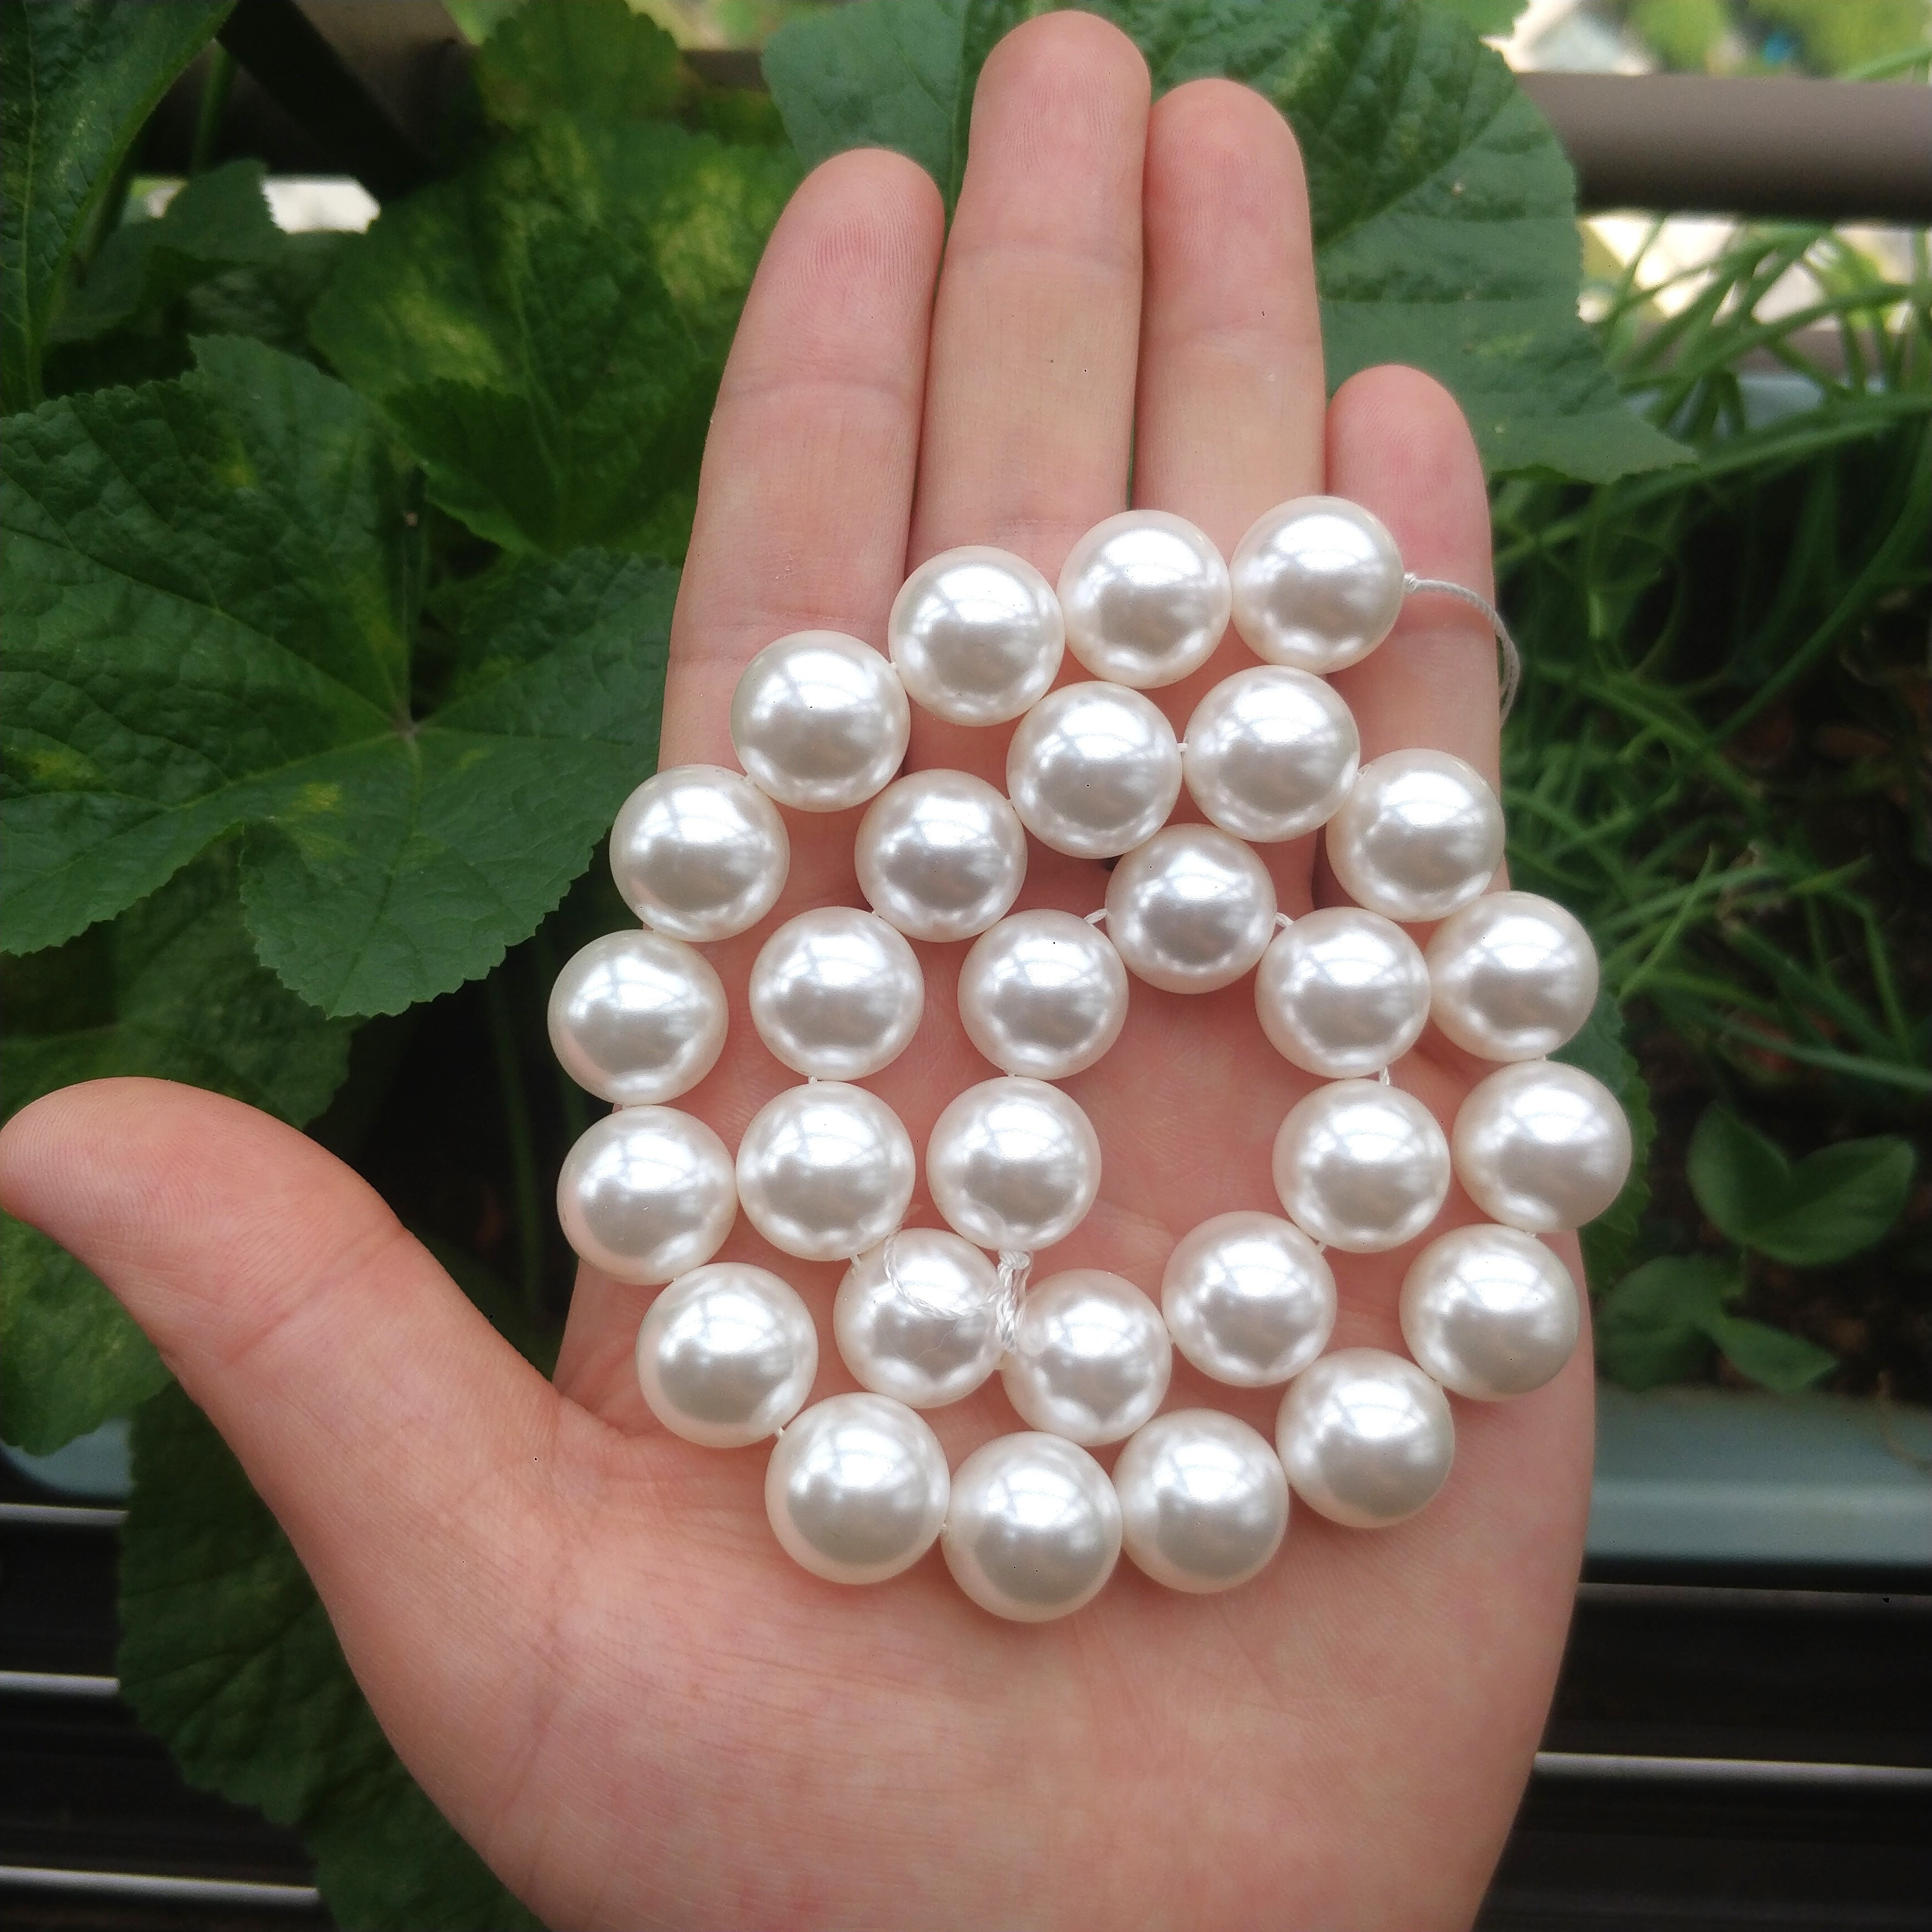 2mm-16mm Natural White Mother Of Pearl Shell Beads Round Loose Beads  Long-lasting Color Pearl Beads For Jewelry Making Bracelets Necklaces  Earrings Cr